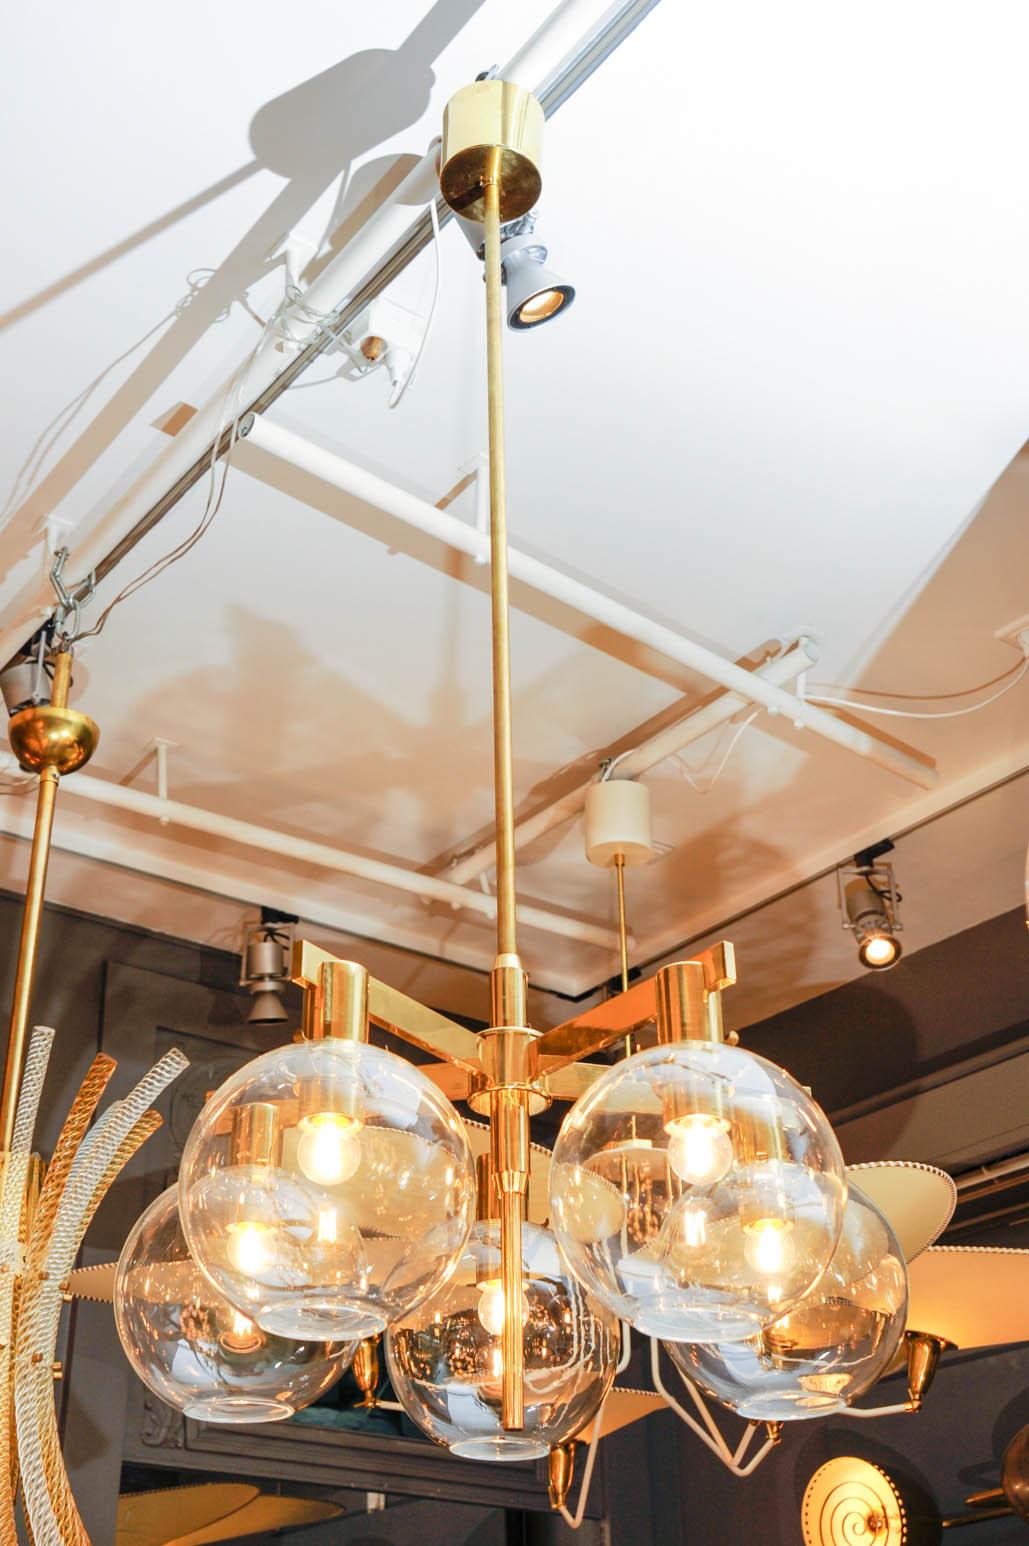 Pair of chandeliers by one of Scandinavian Modern most notorious designer, Hans Agne Jakobsson.

All in brass, long central stem with five arms each holding a clear glass globe.

Original sticker inside of each canopy.